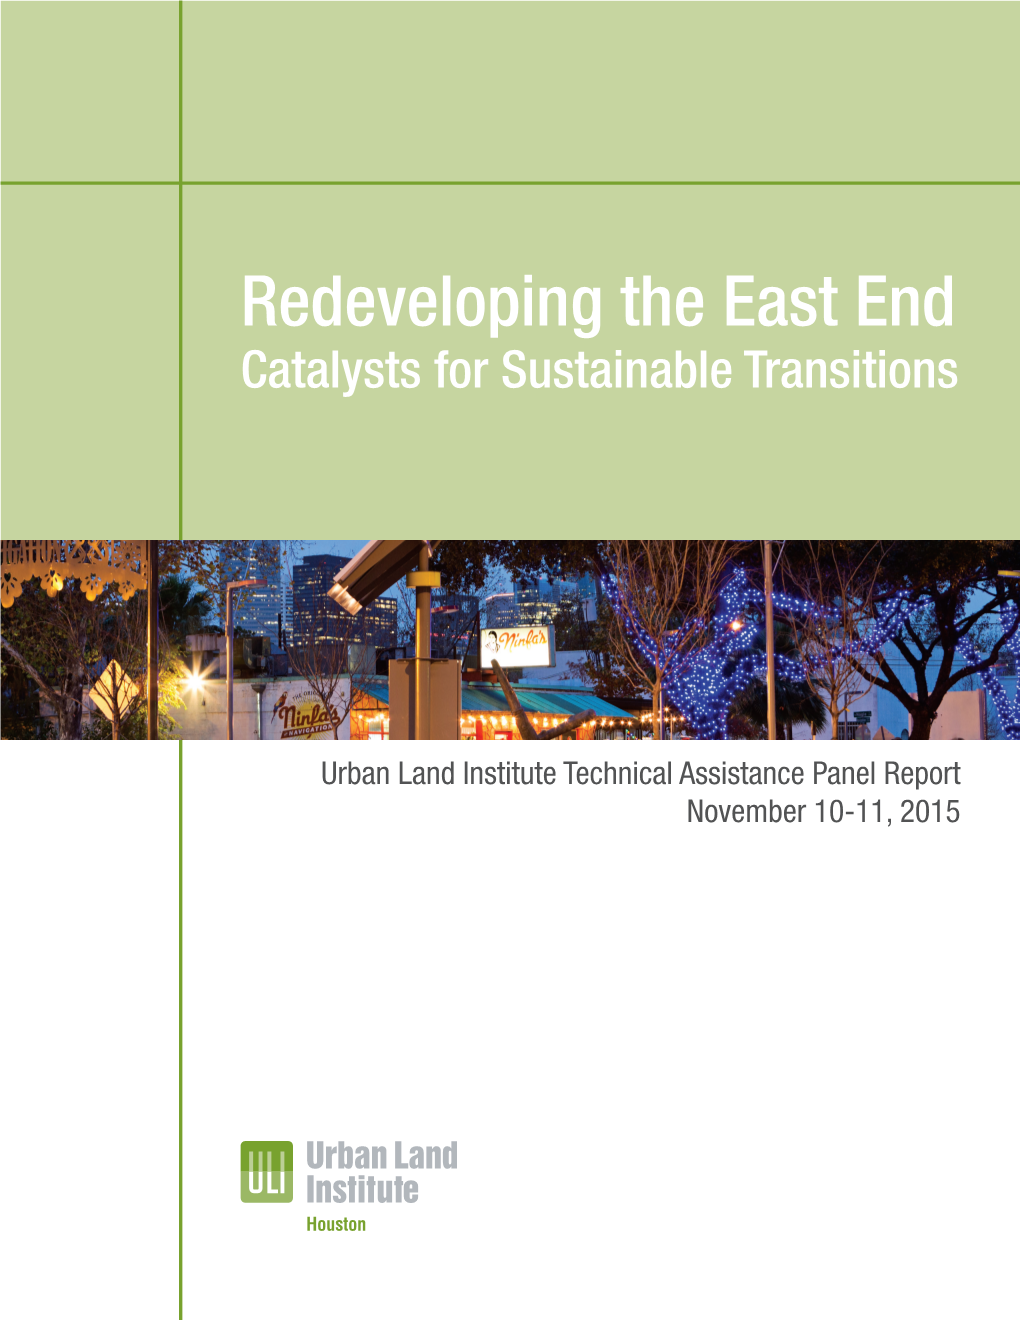 Redeveloping the East End Catalysts for Sustainable Transitions